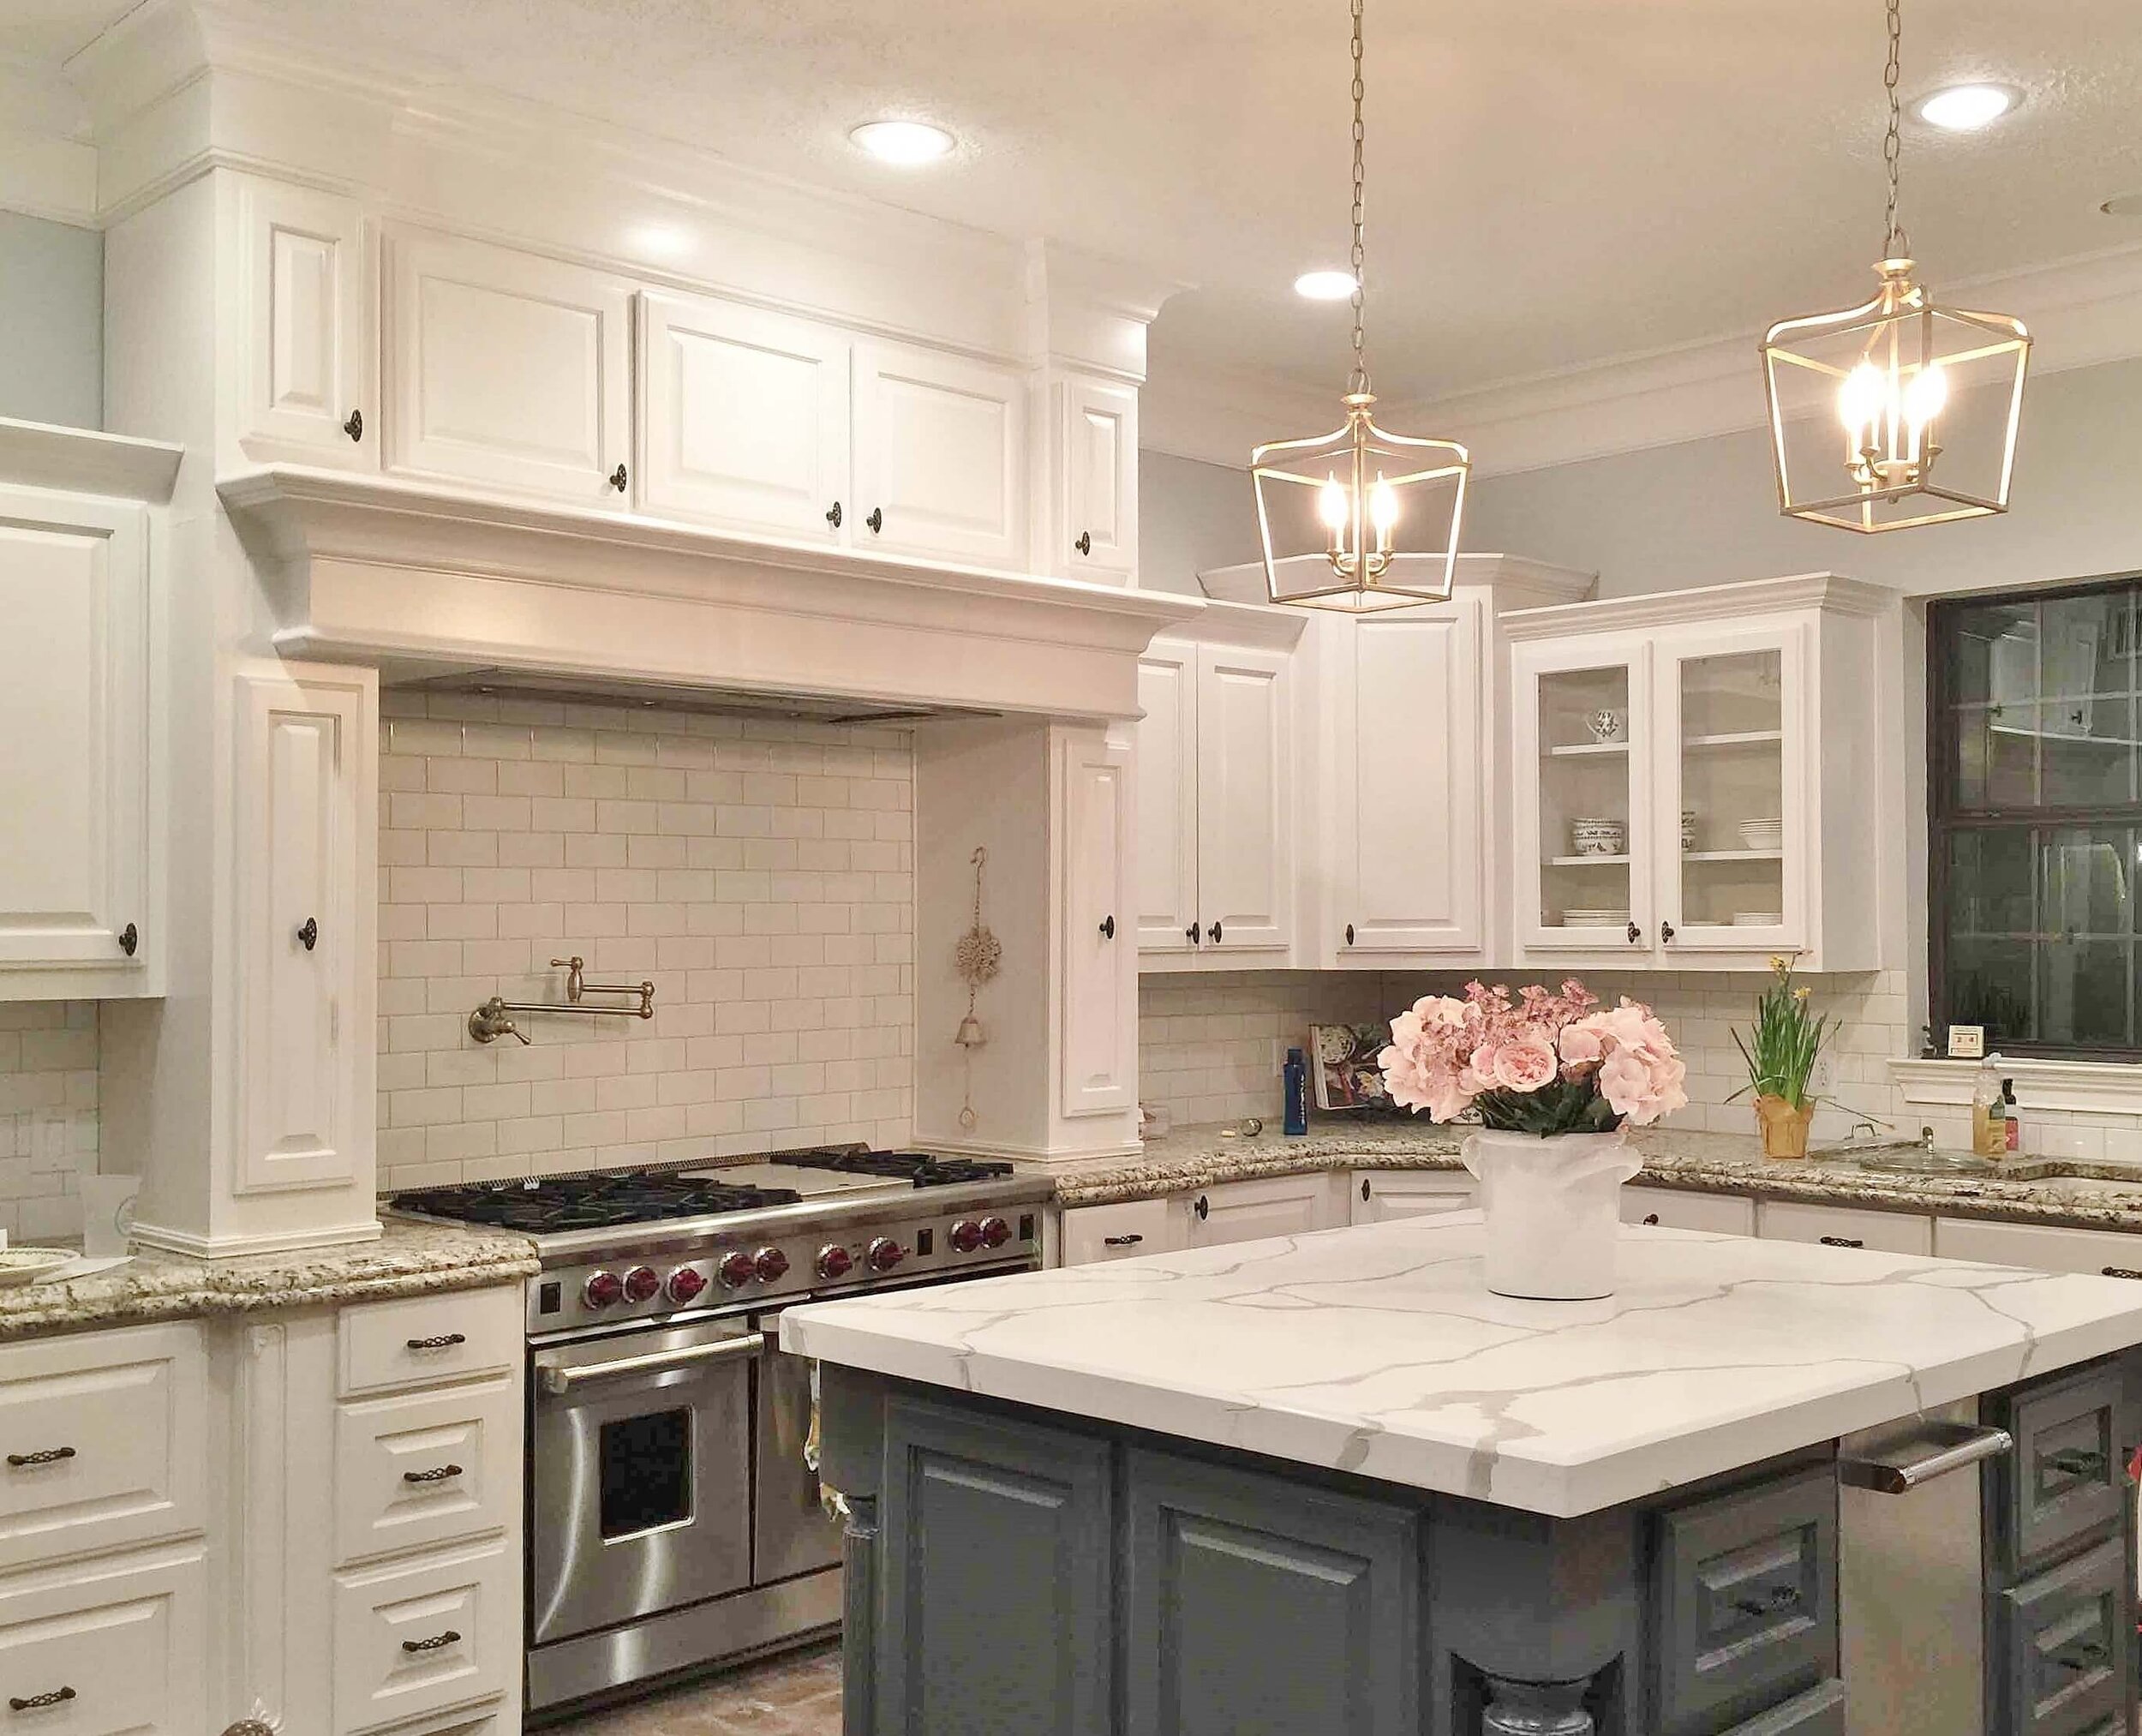 The Benefits of Kitchen Remodeling: Adding Value to Your Home